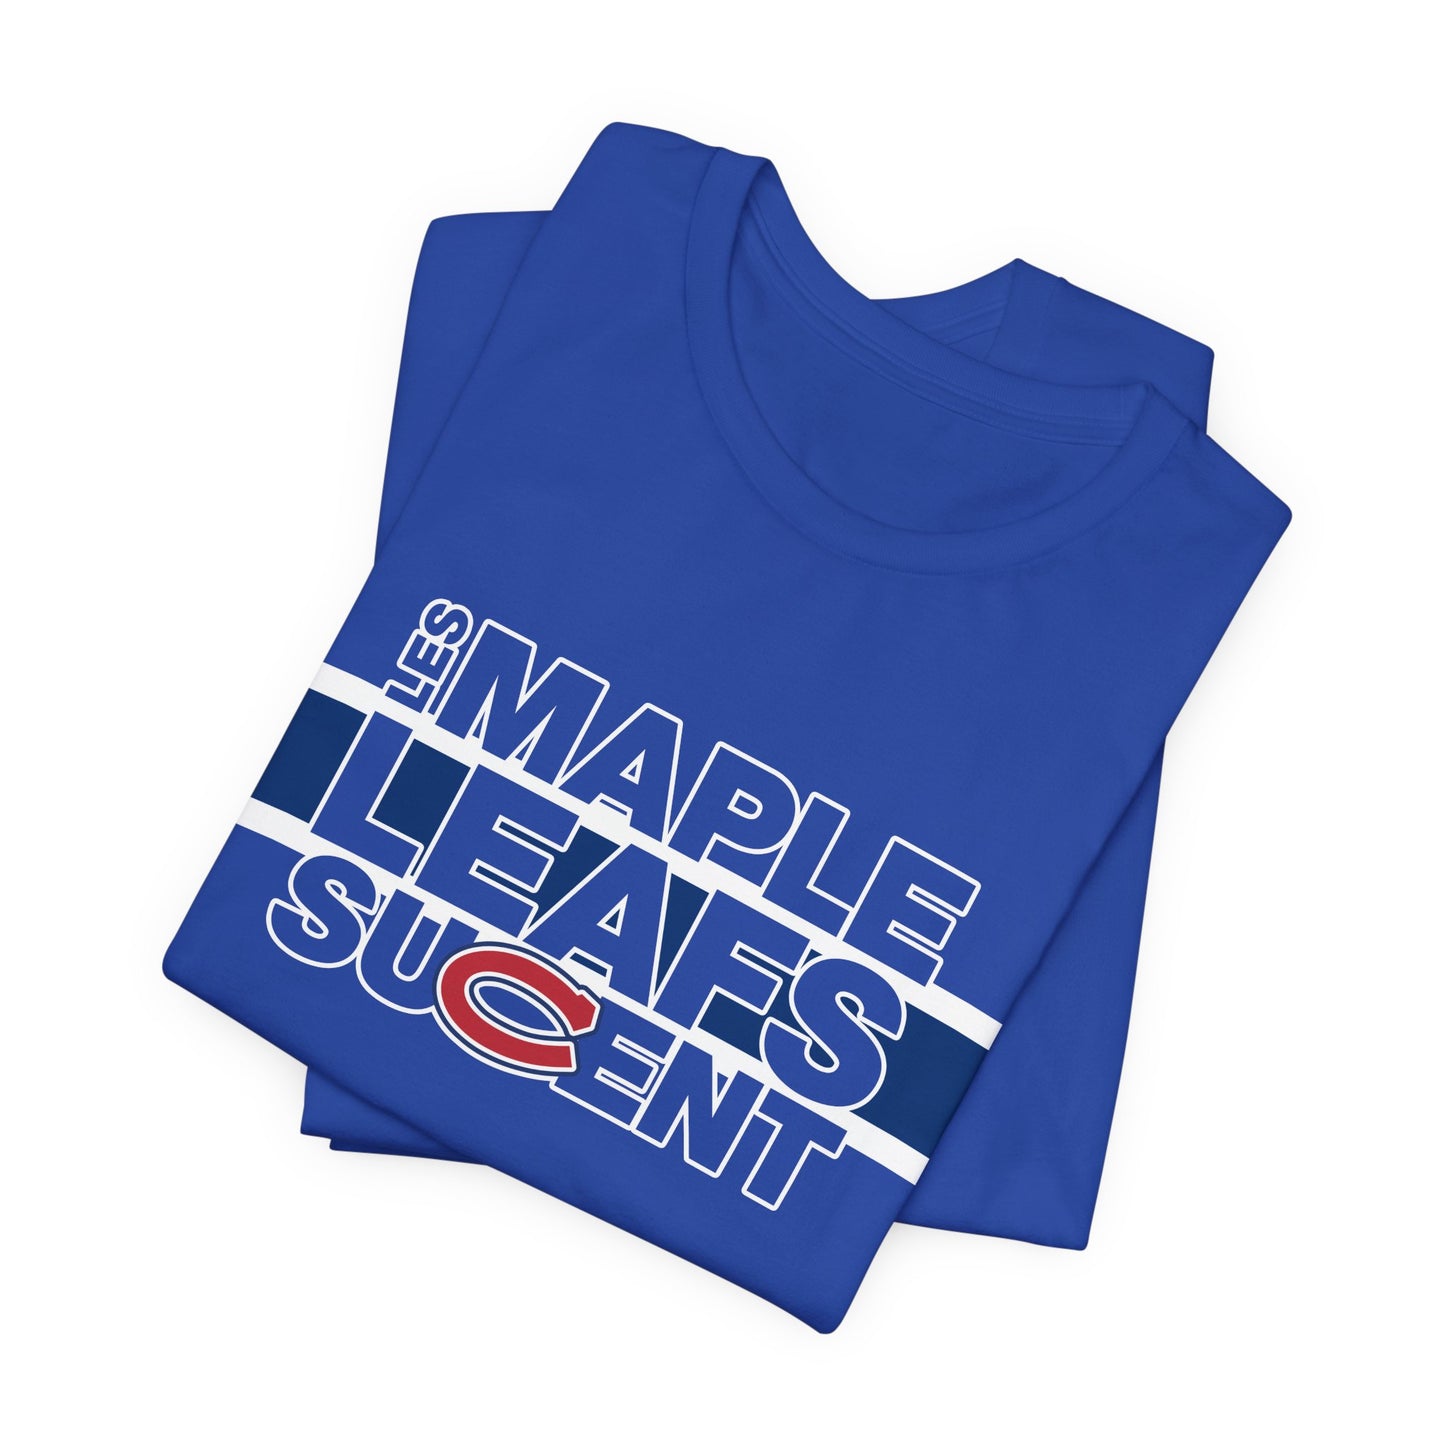 That Team of Leaves Sucent Very Mucho (for Montreal fans) - Unisex Jersey Short Sleeve Tee